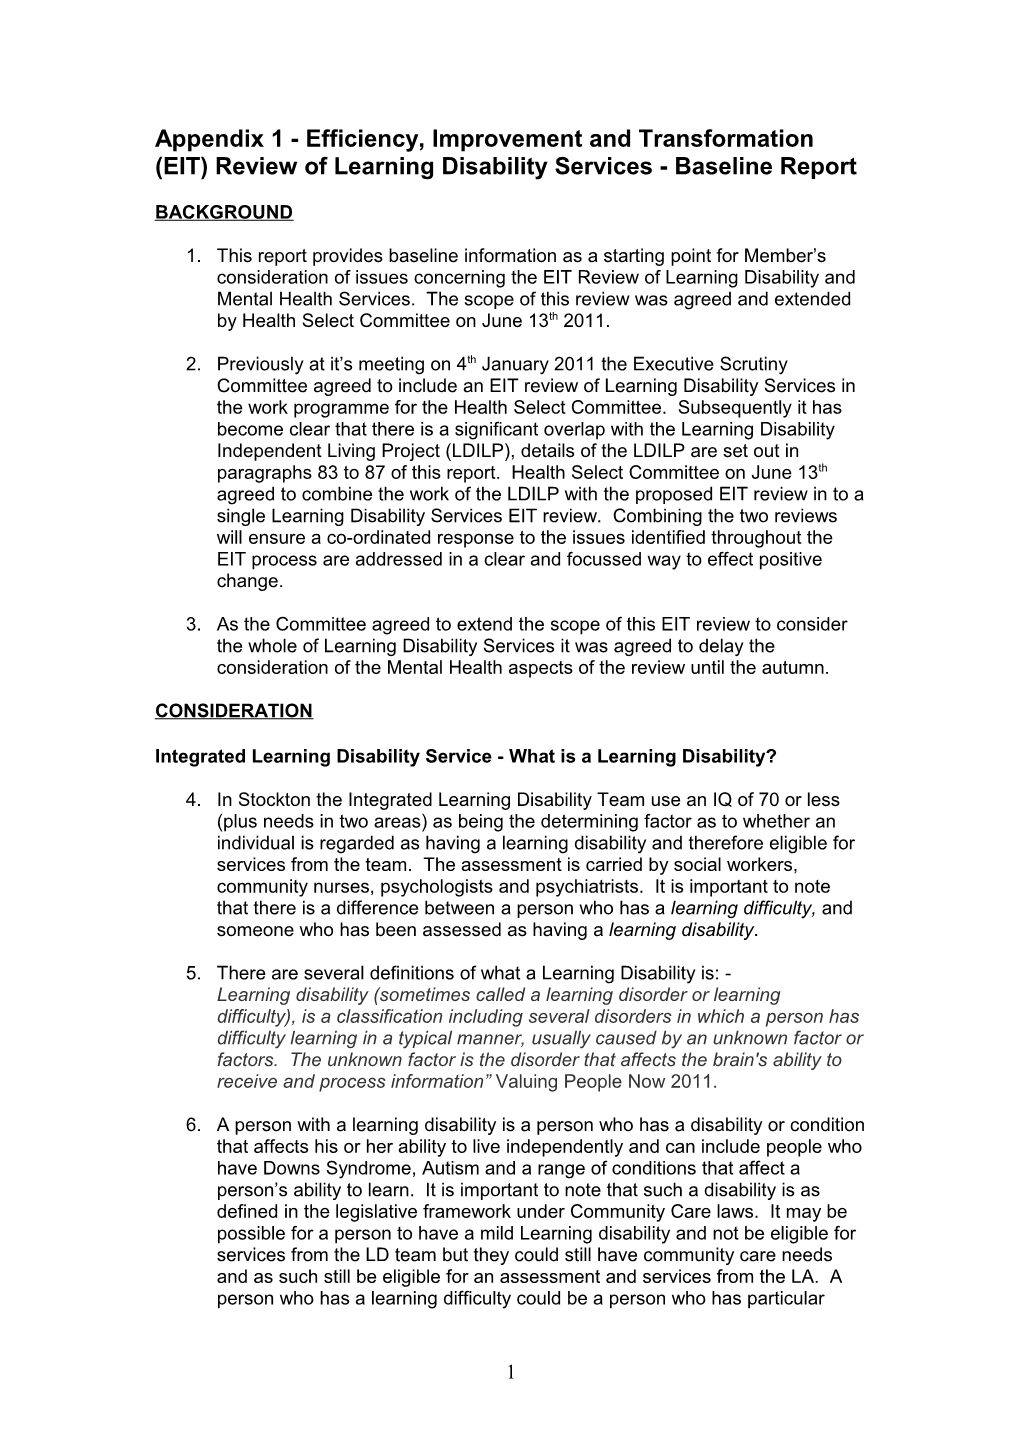 Efficiency, Improvement and Transformation (EIT) Review of Learning Disability Services